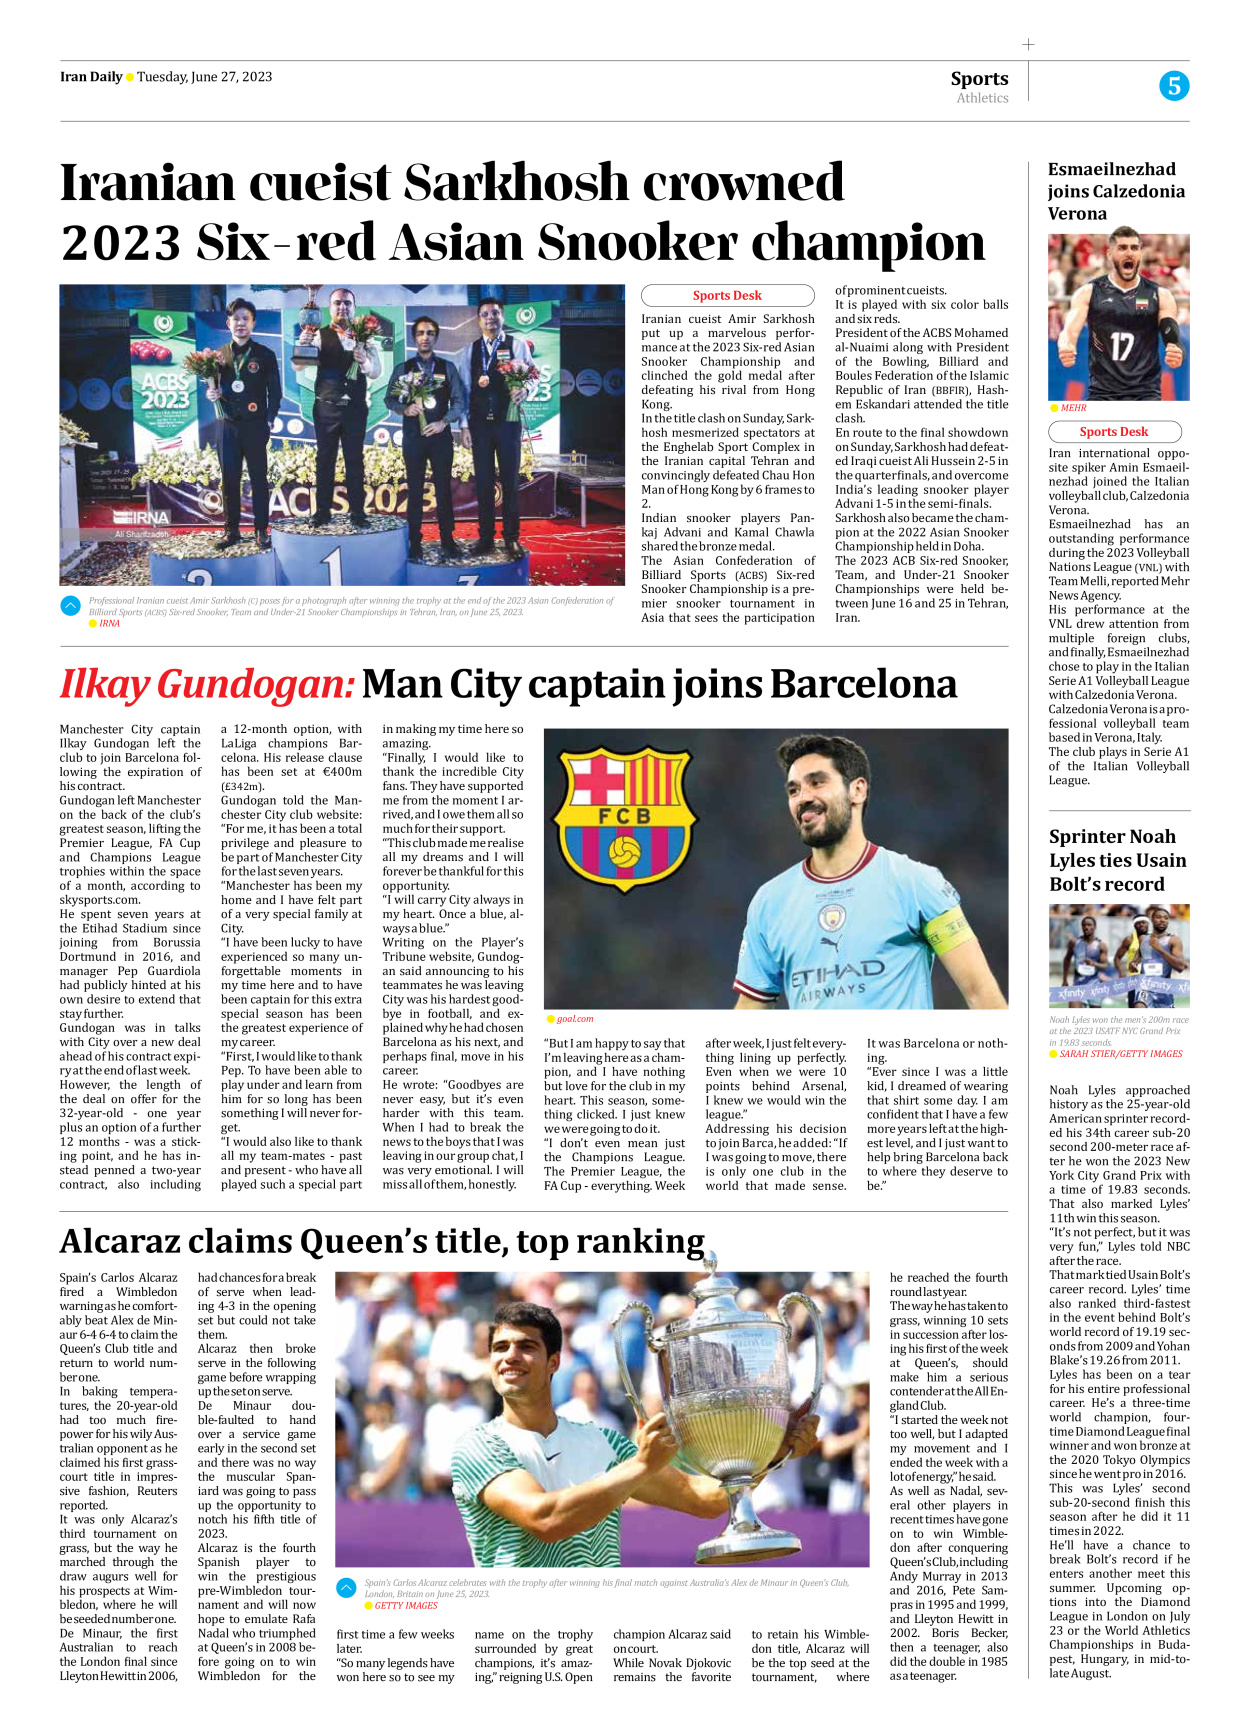 Iran Daily - Number Seven Thousand Three Hundred and Twenty Five - 27 June 2023 - Page 5